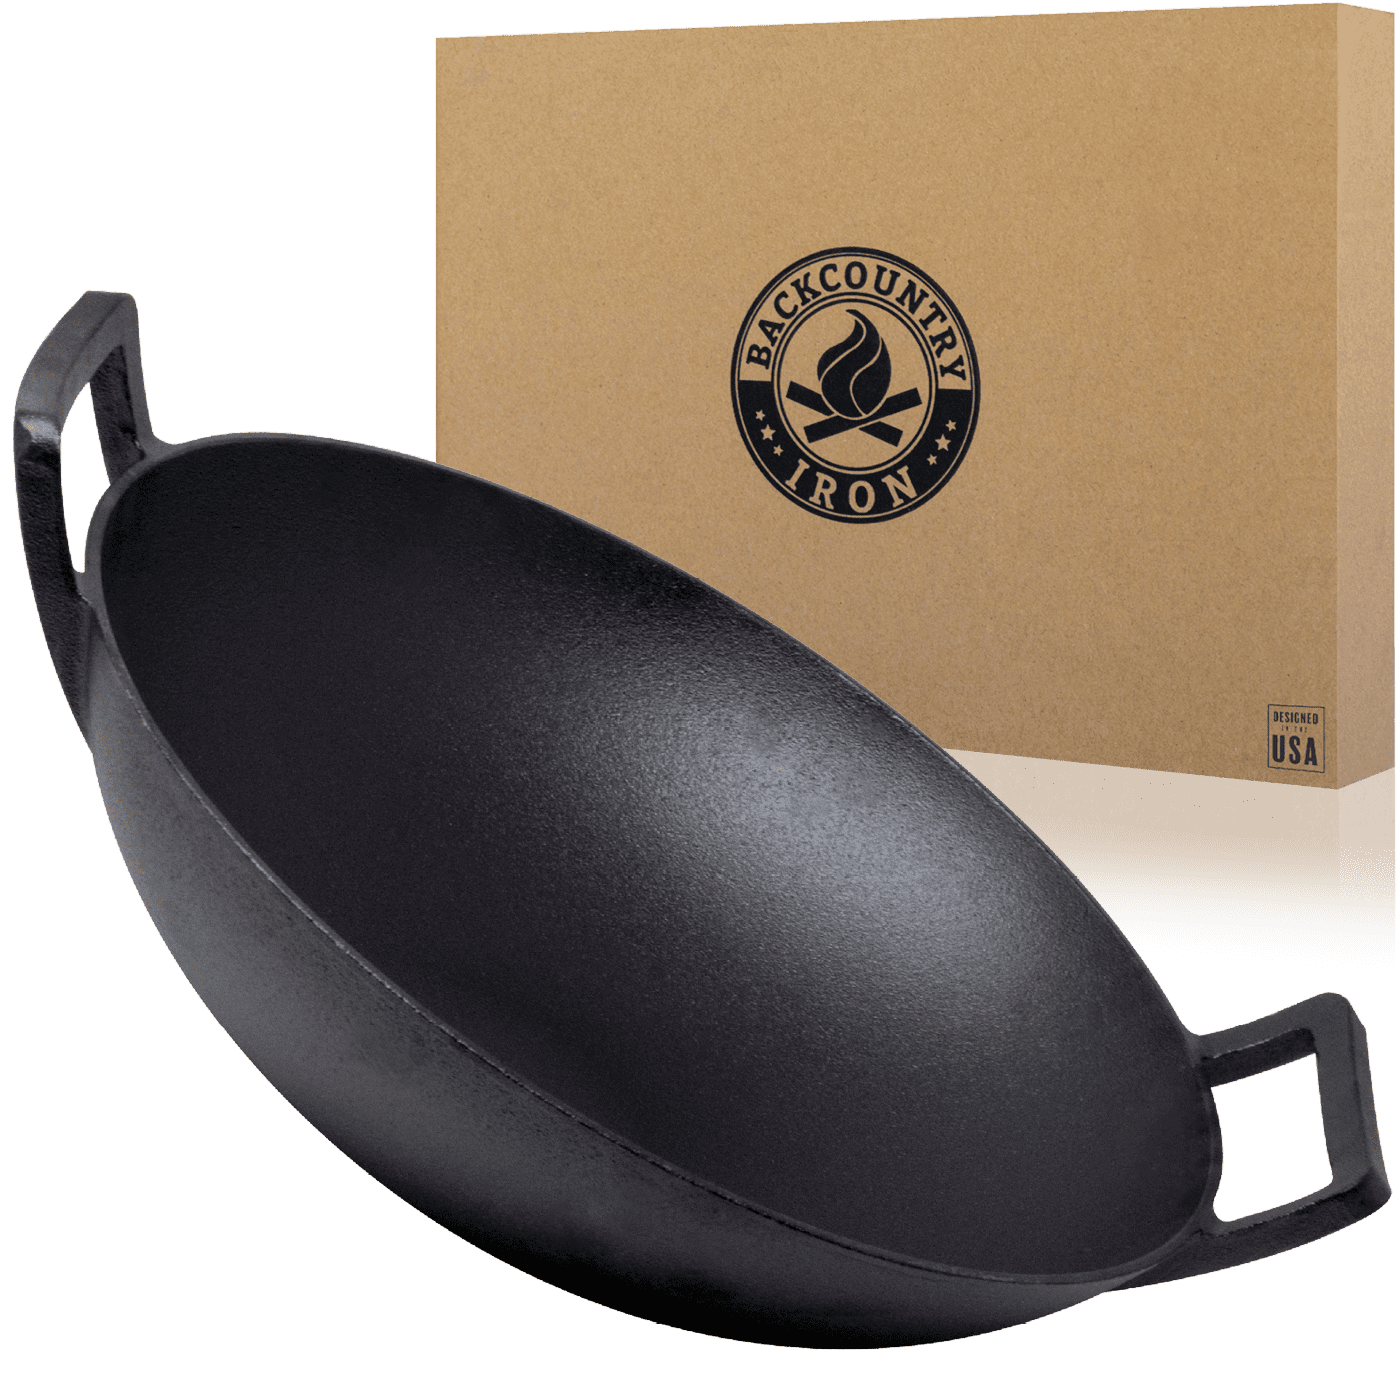 Cast Iron Wednesday: Unboxing and Short Cooking Review BackCountry